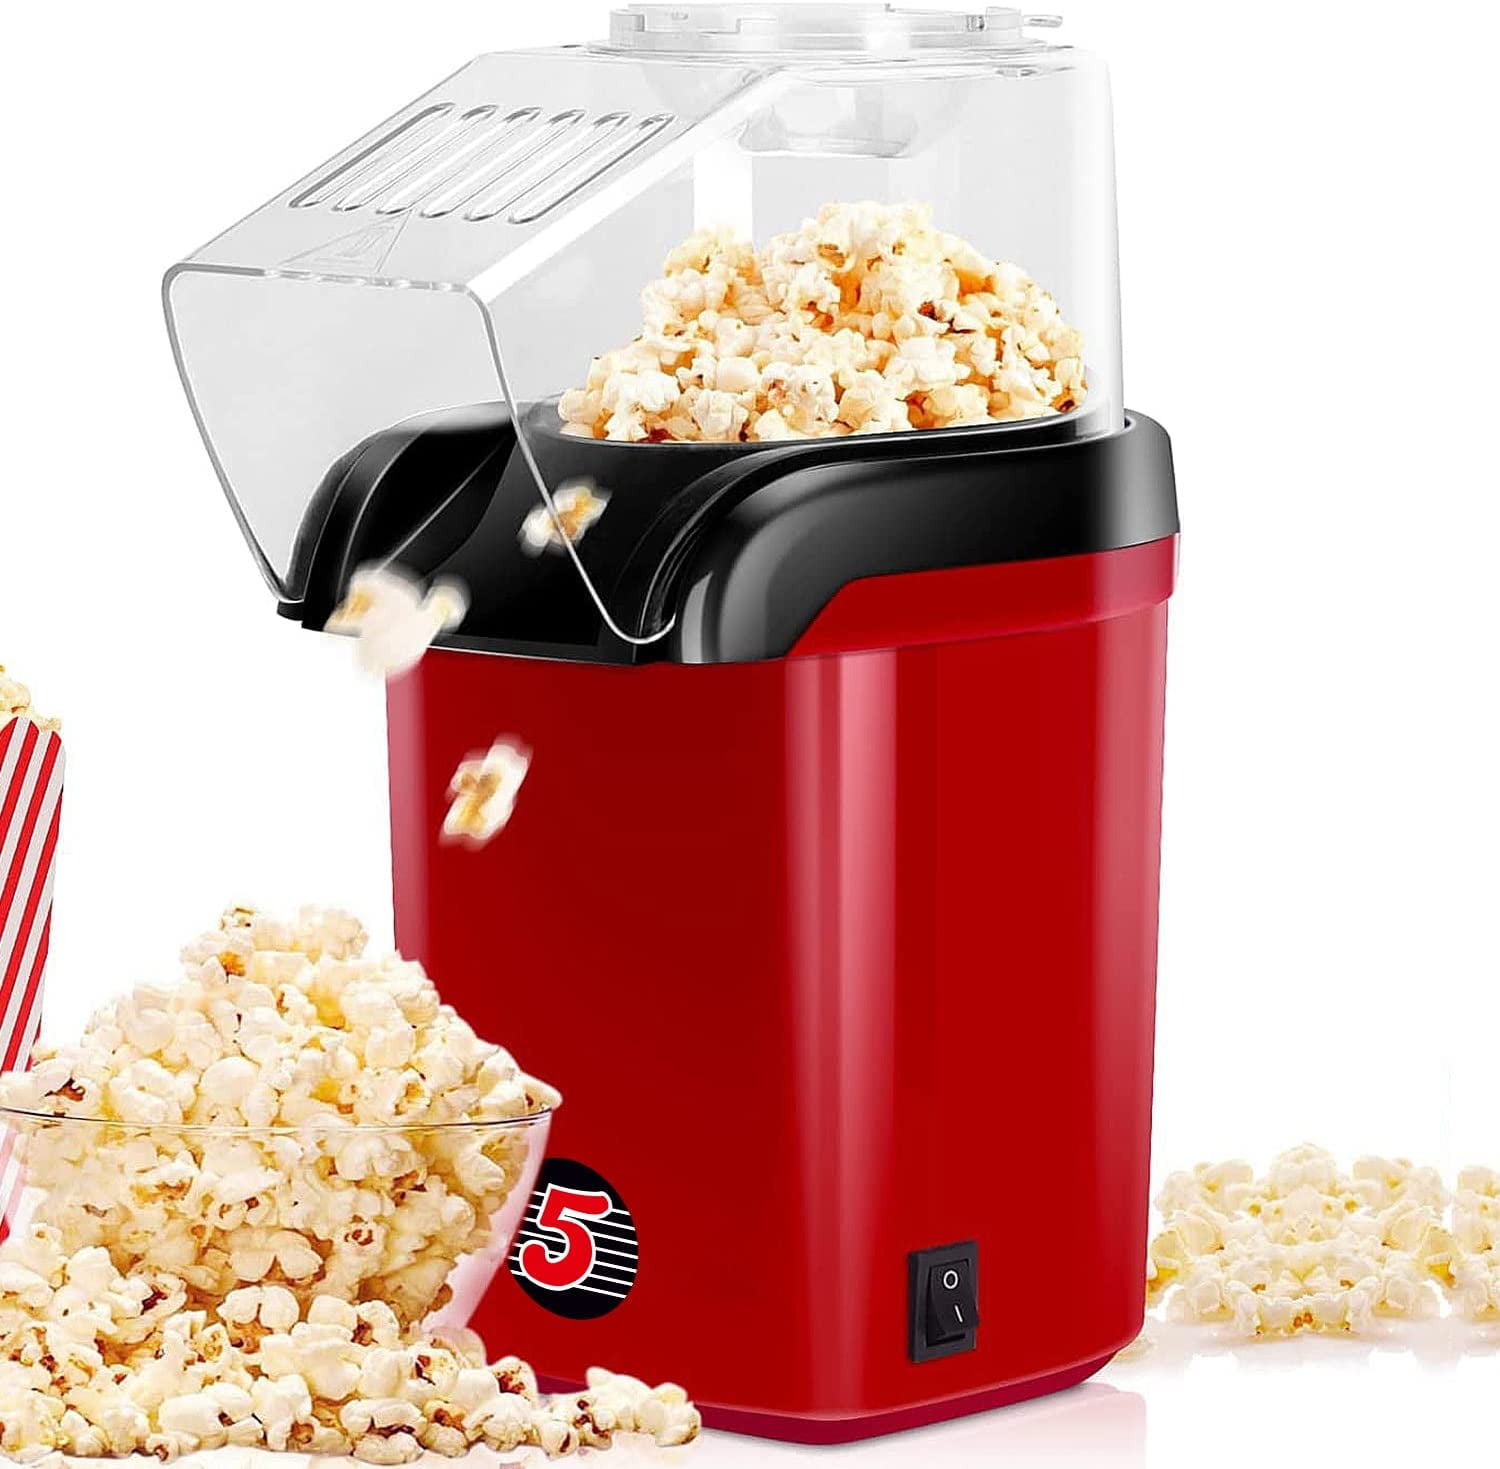 5 Core Hot Air Popcorn Maker Machine 1200W Electric Popcorn Popper Kernel  Corn Maker Bpa Free, 95% Popping Rate, 2 Minutes Fast, No Oil Healthy Snack